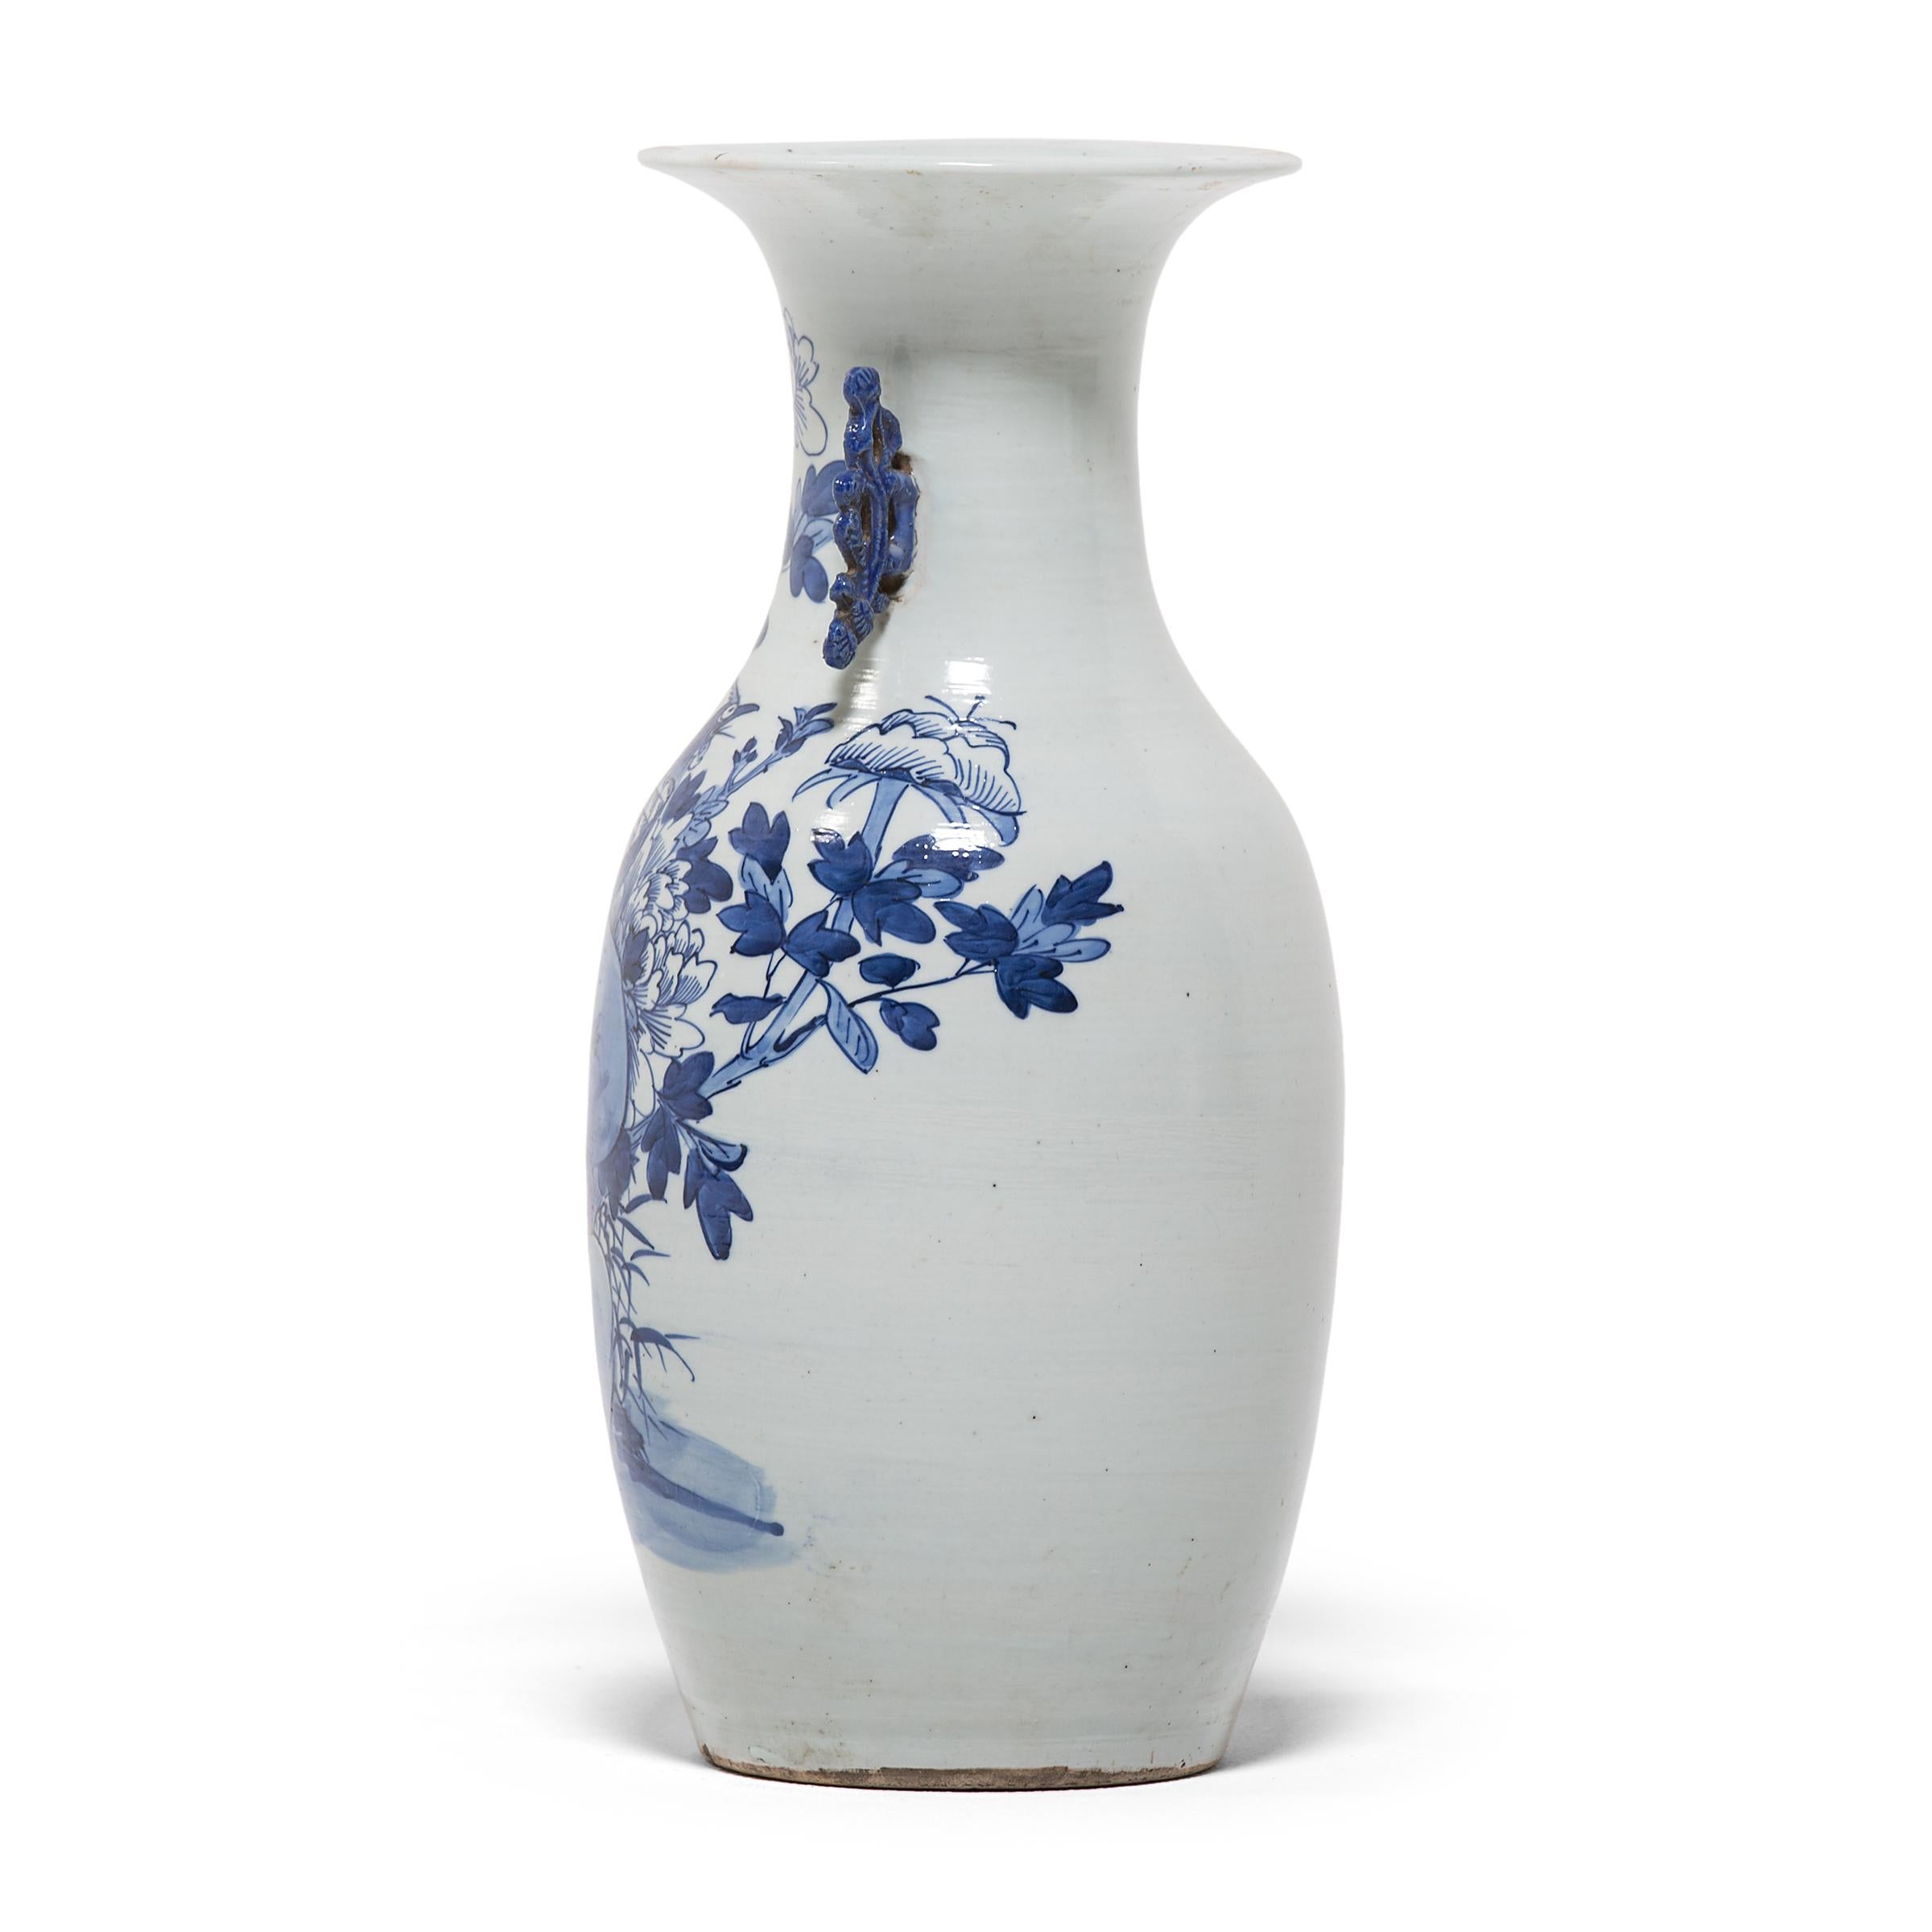 This exquisite 19th century porcelain vase has a gently tapered body and a dramatic flared lip, flanked by two molded scroll handles. Painted with expressive brushwork, the vase is festooned with peony blossoms, emblems of spring time and feminine